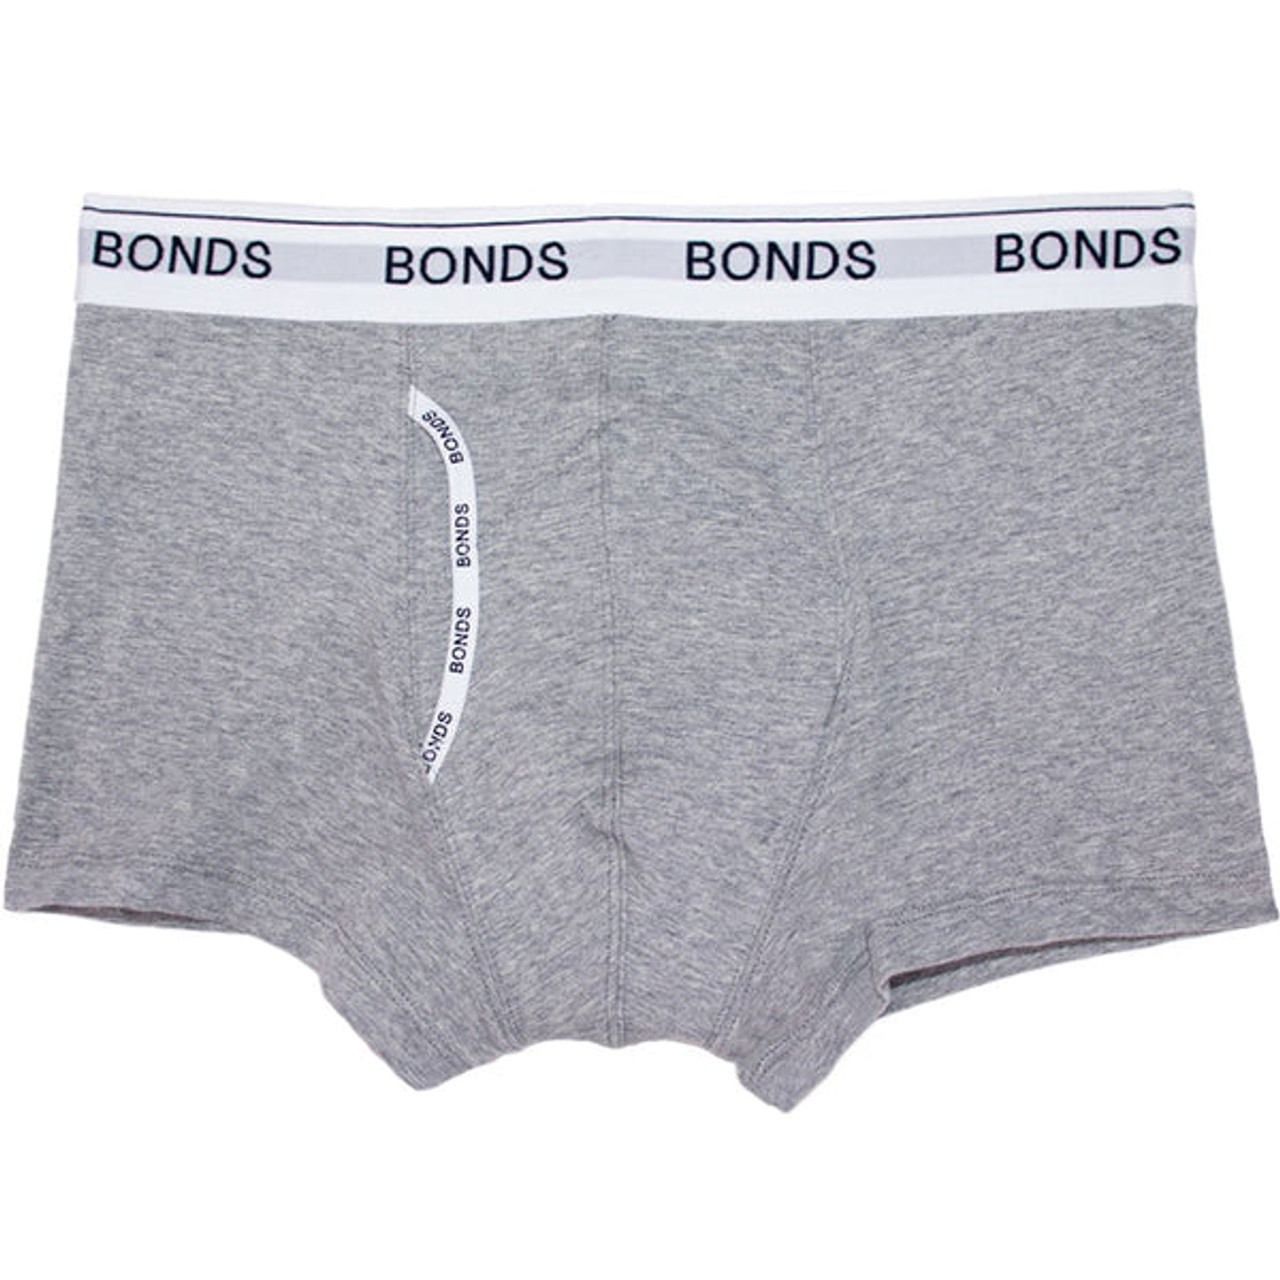 Bonds Trunk with incontinence pad